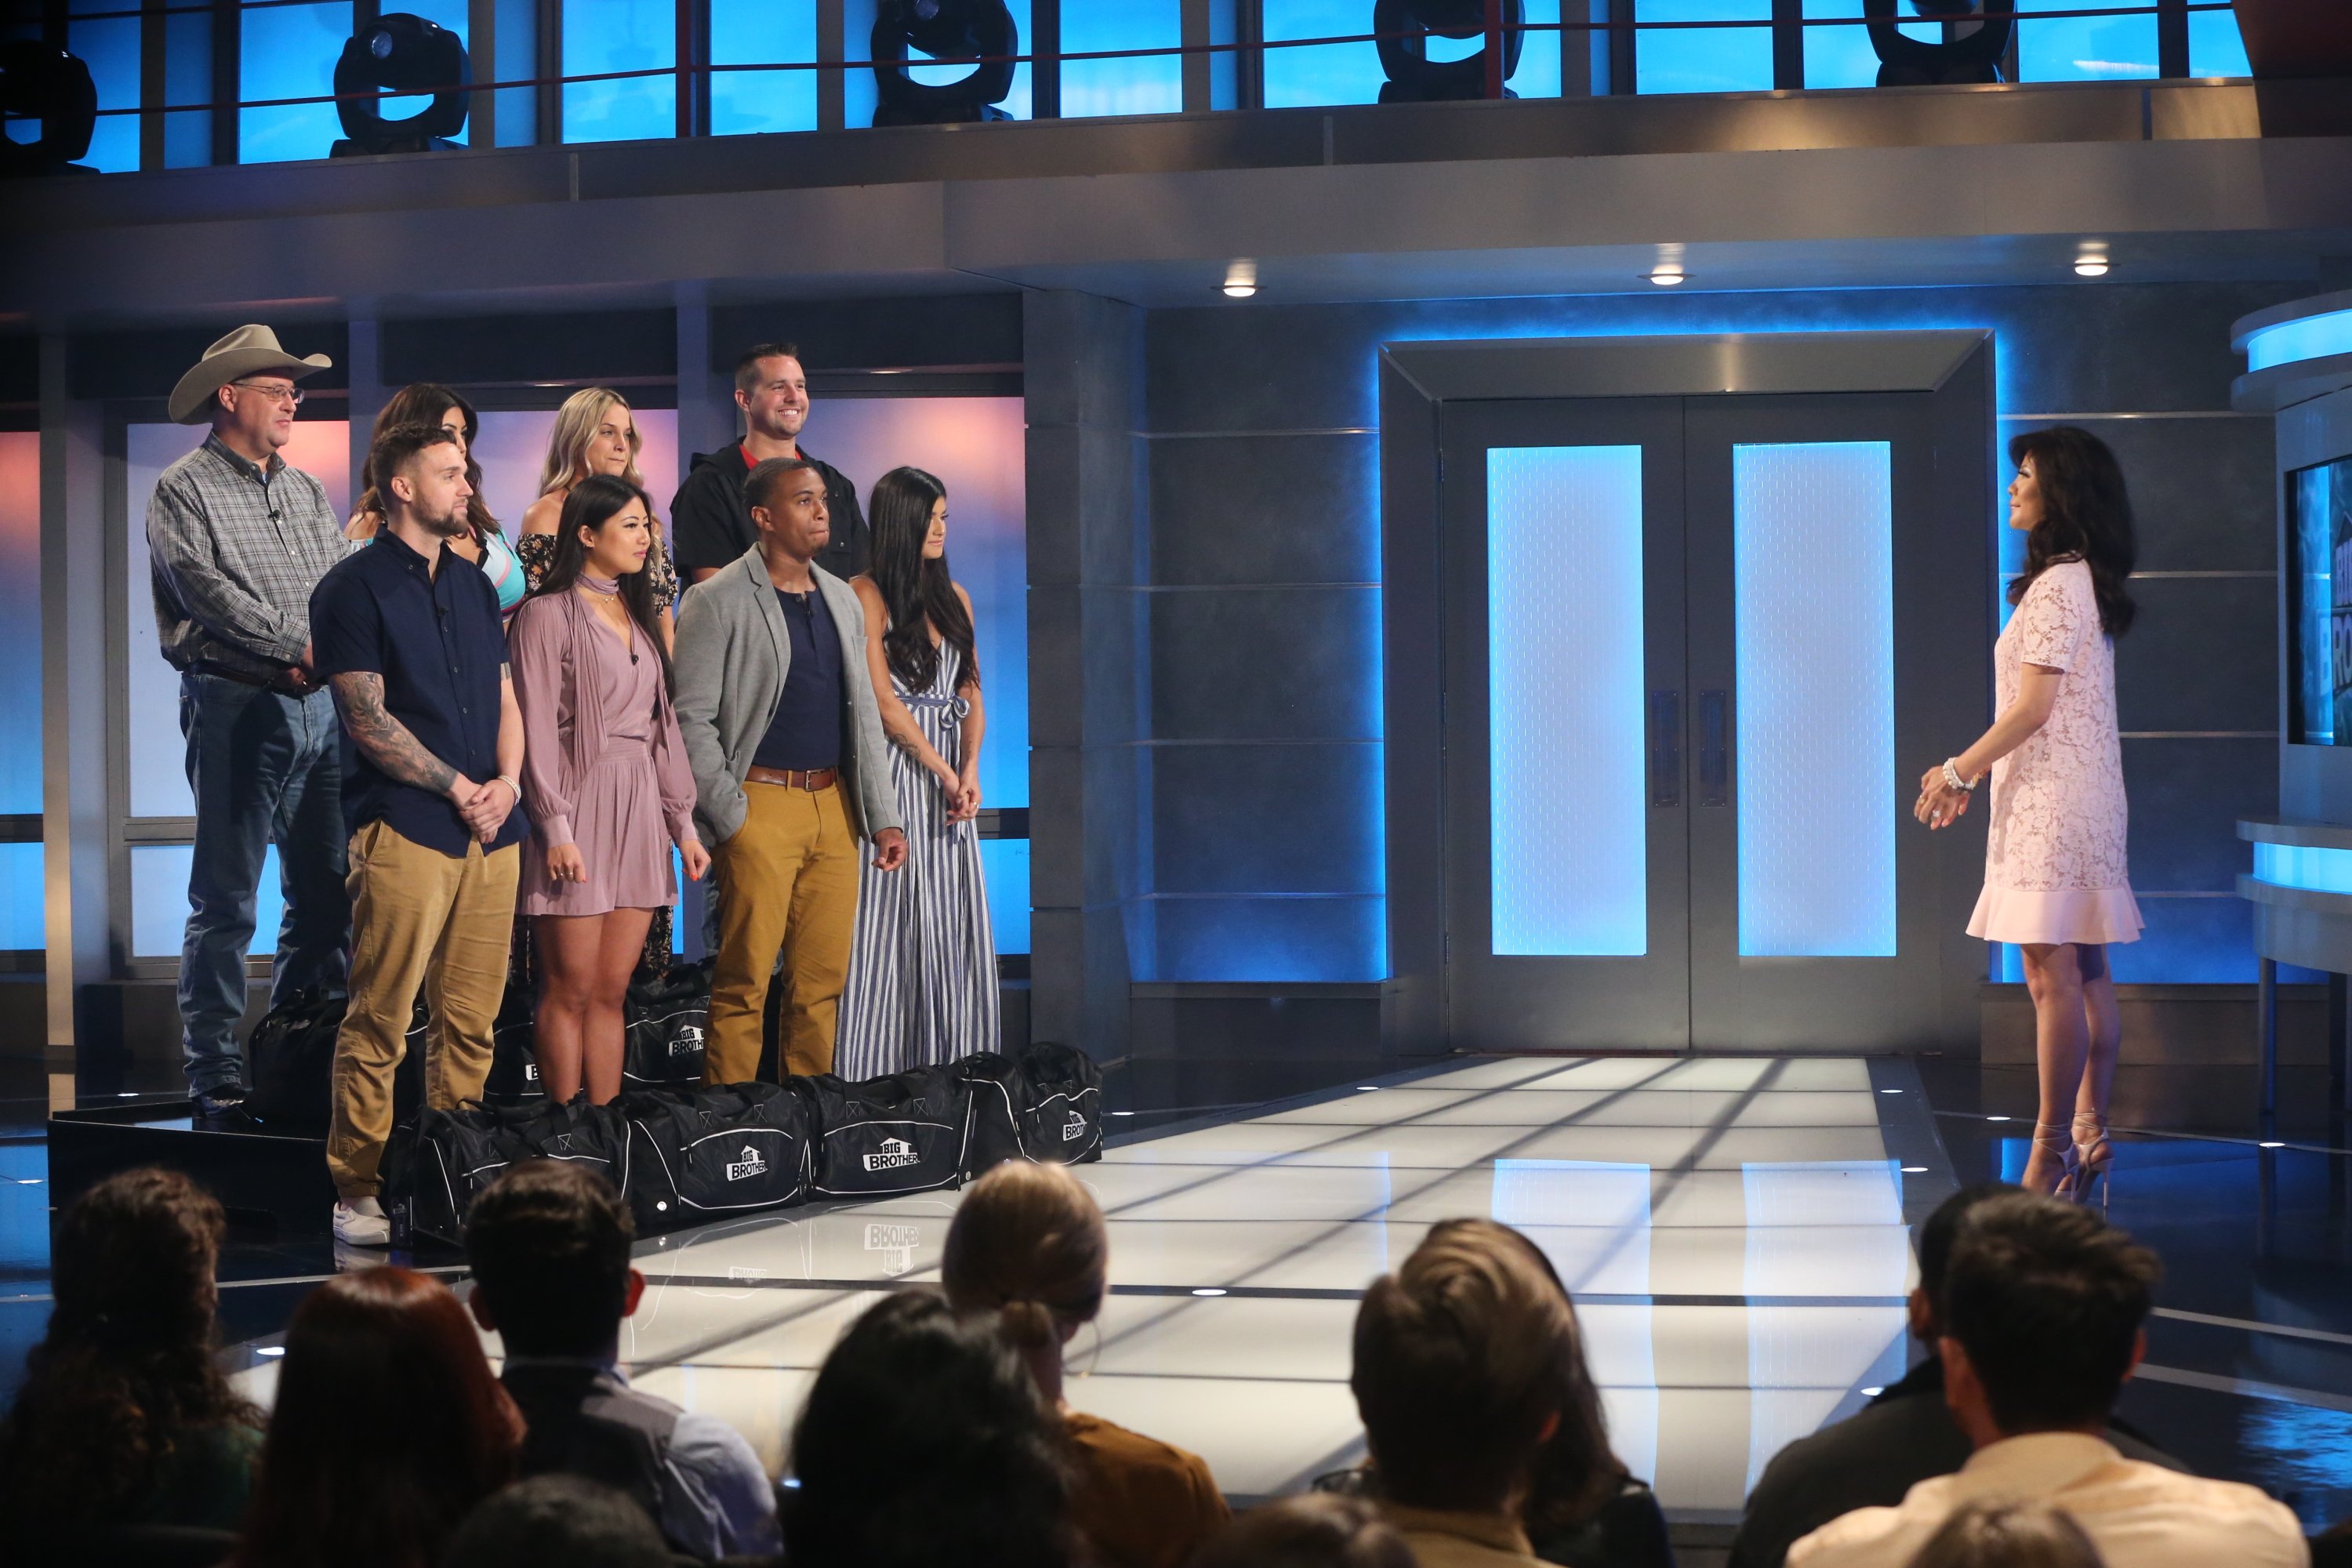 Host Julie Chen Moonves with houseguests: L-R bottom row: Nick Macaroni, Isabella Wang, David Alexander, Analyse Talvera; L_R top row: Cliff Hogg, Jessica Milagros, Christie Murphy, Sam Smith on Big Brother 21's two-night premiere event